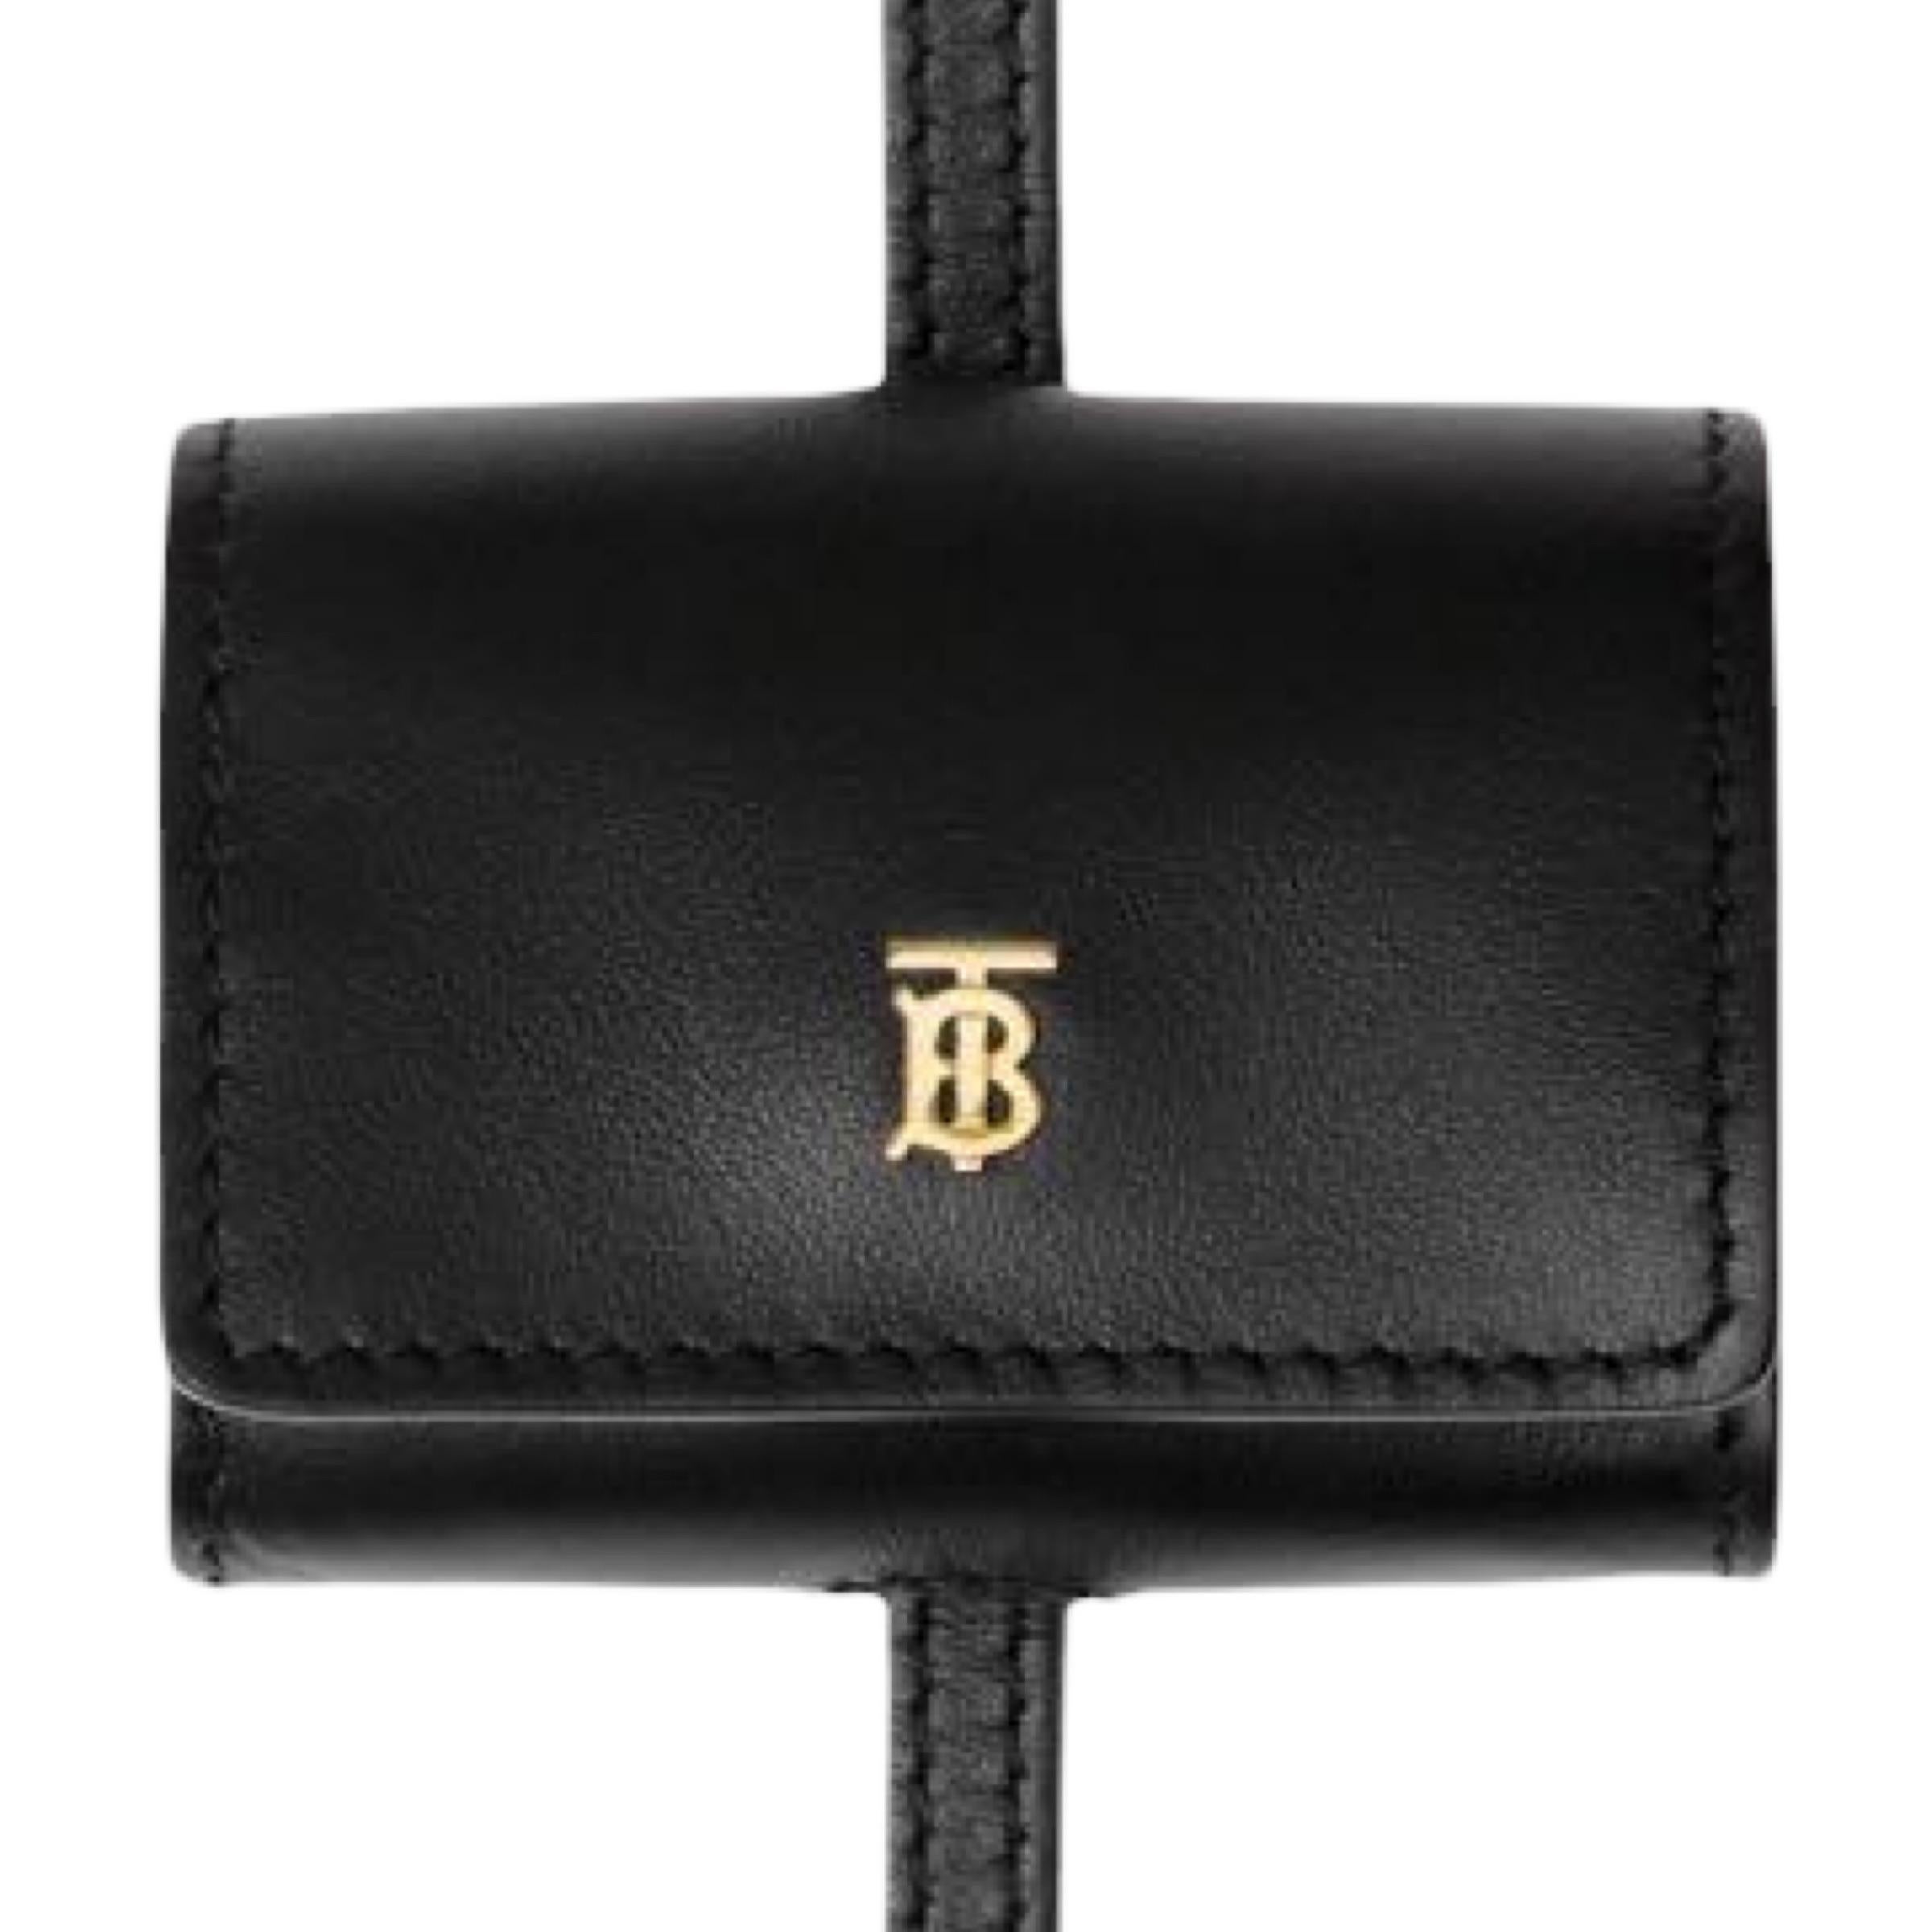 New Burberry Black Leather Airpods Pro Case Lanyard Crossbody Bag

Authenticity Guaranteed

DETAILS
Brand: Burberry
Condition: Brand new
Gender: Unisex
Category: Airpods case
Color: Black
Material: Leather
Burberry logo plaque
Gold-tone